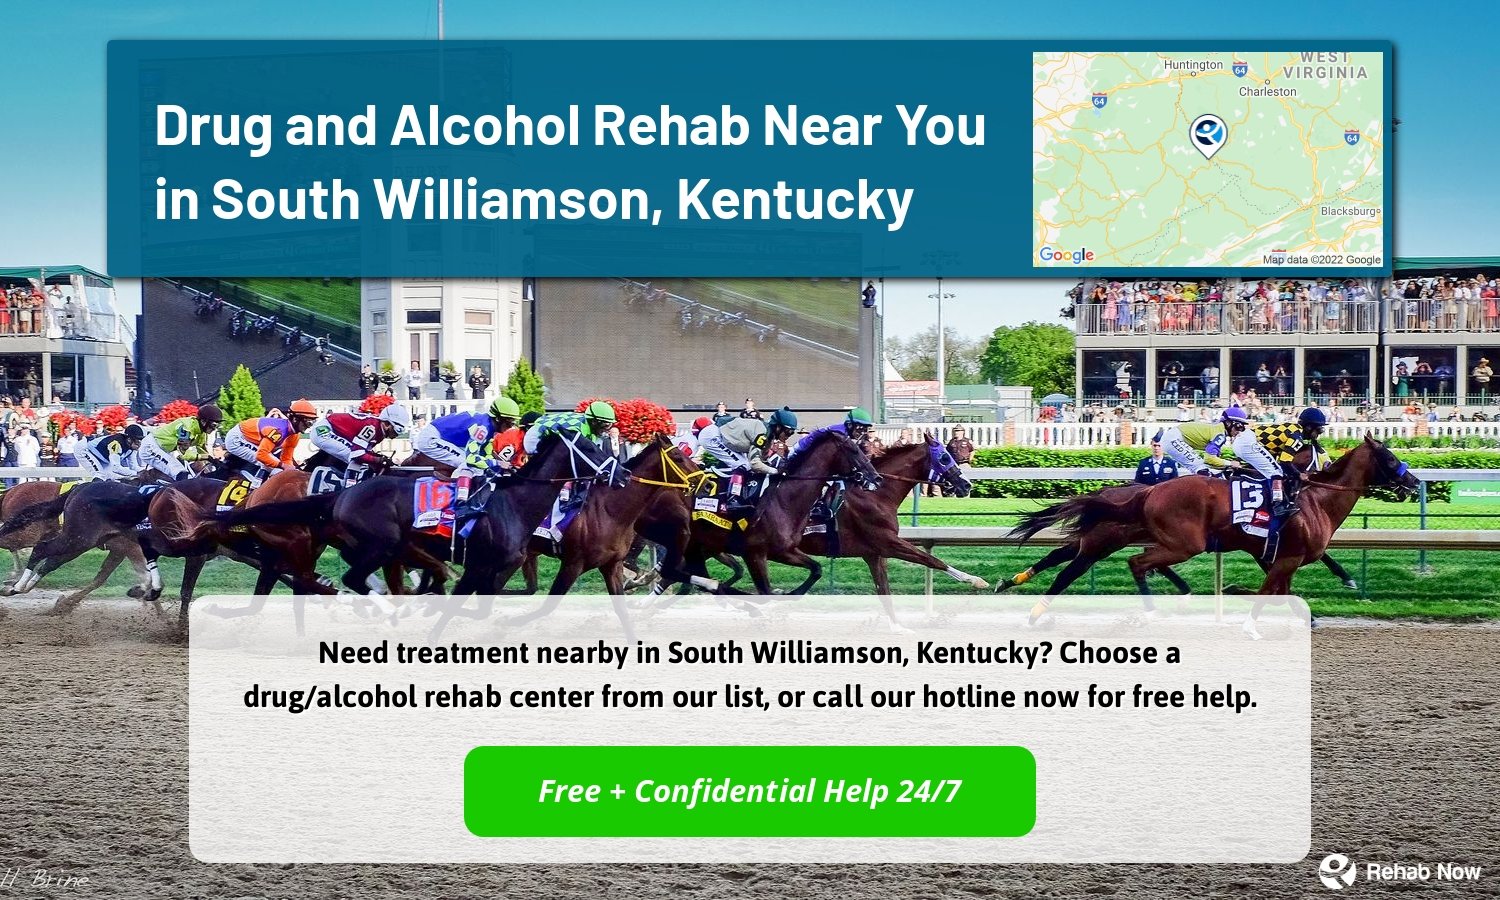 Need treatment nearby in South Williamson, Kentucky? Choose a drug/alcohol rehab center from our list, or call our hotline now for free help.